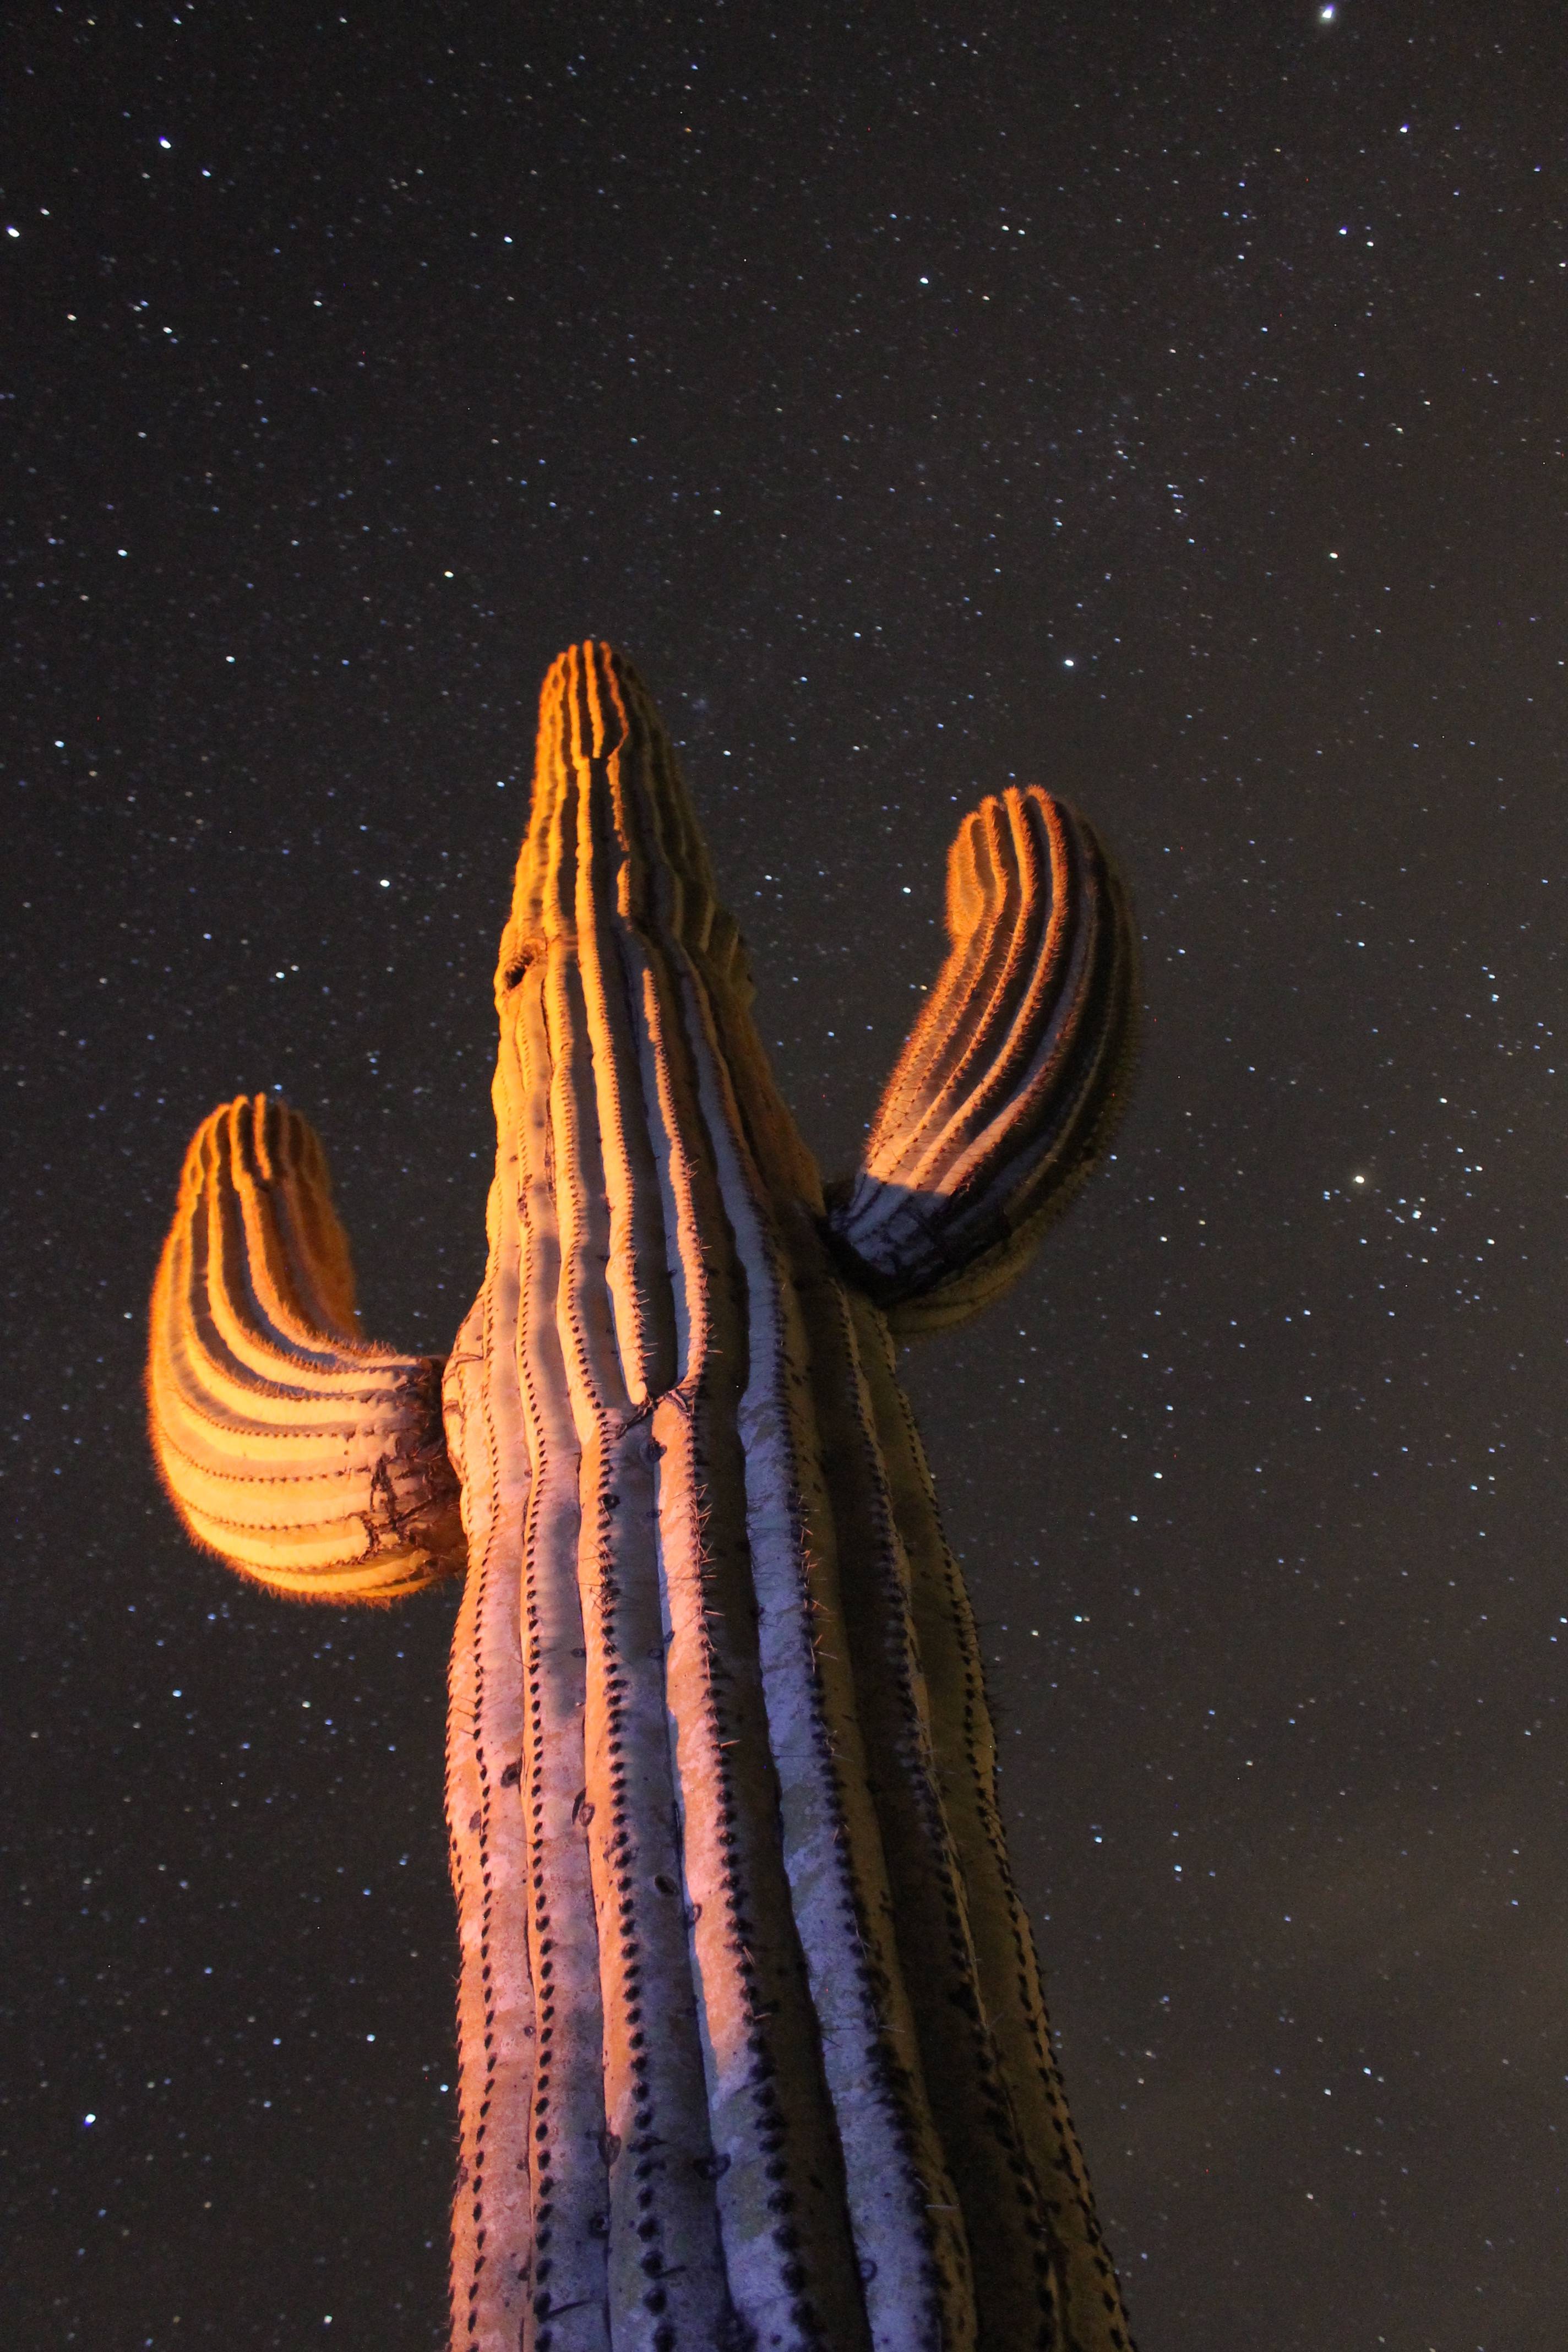 Norm 4 Cacti and stars